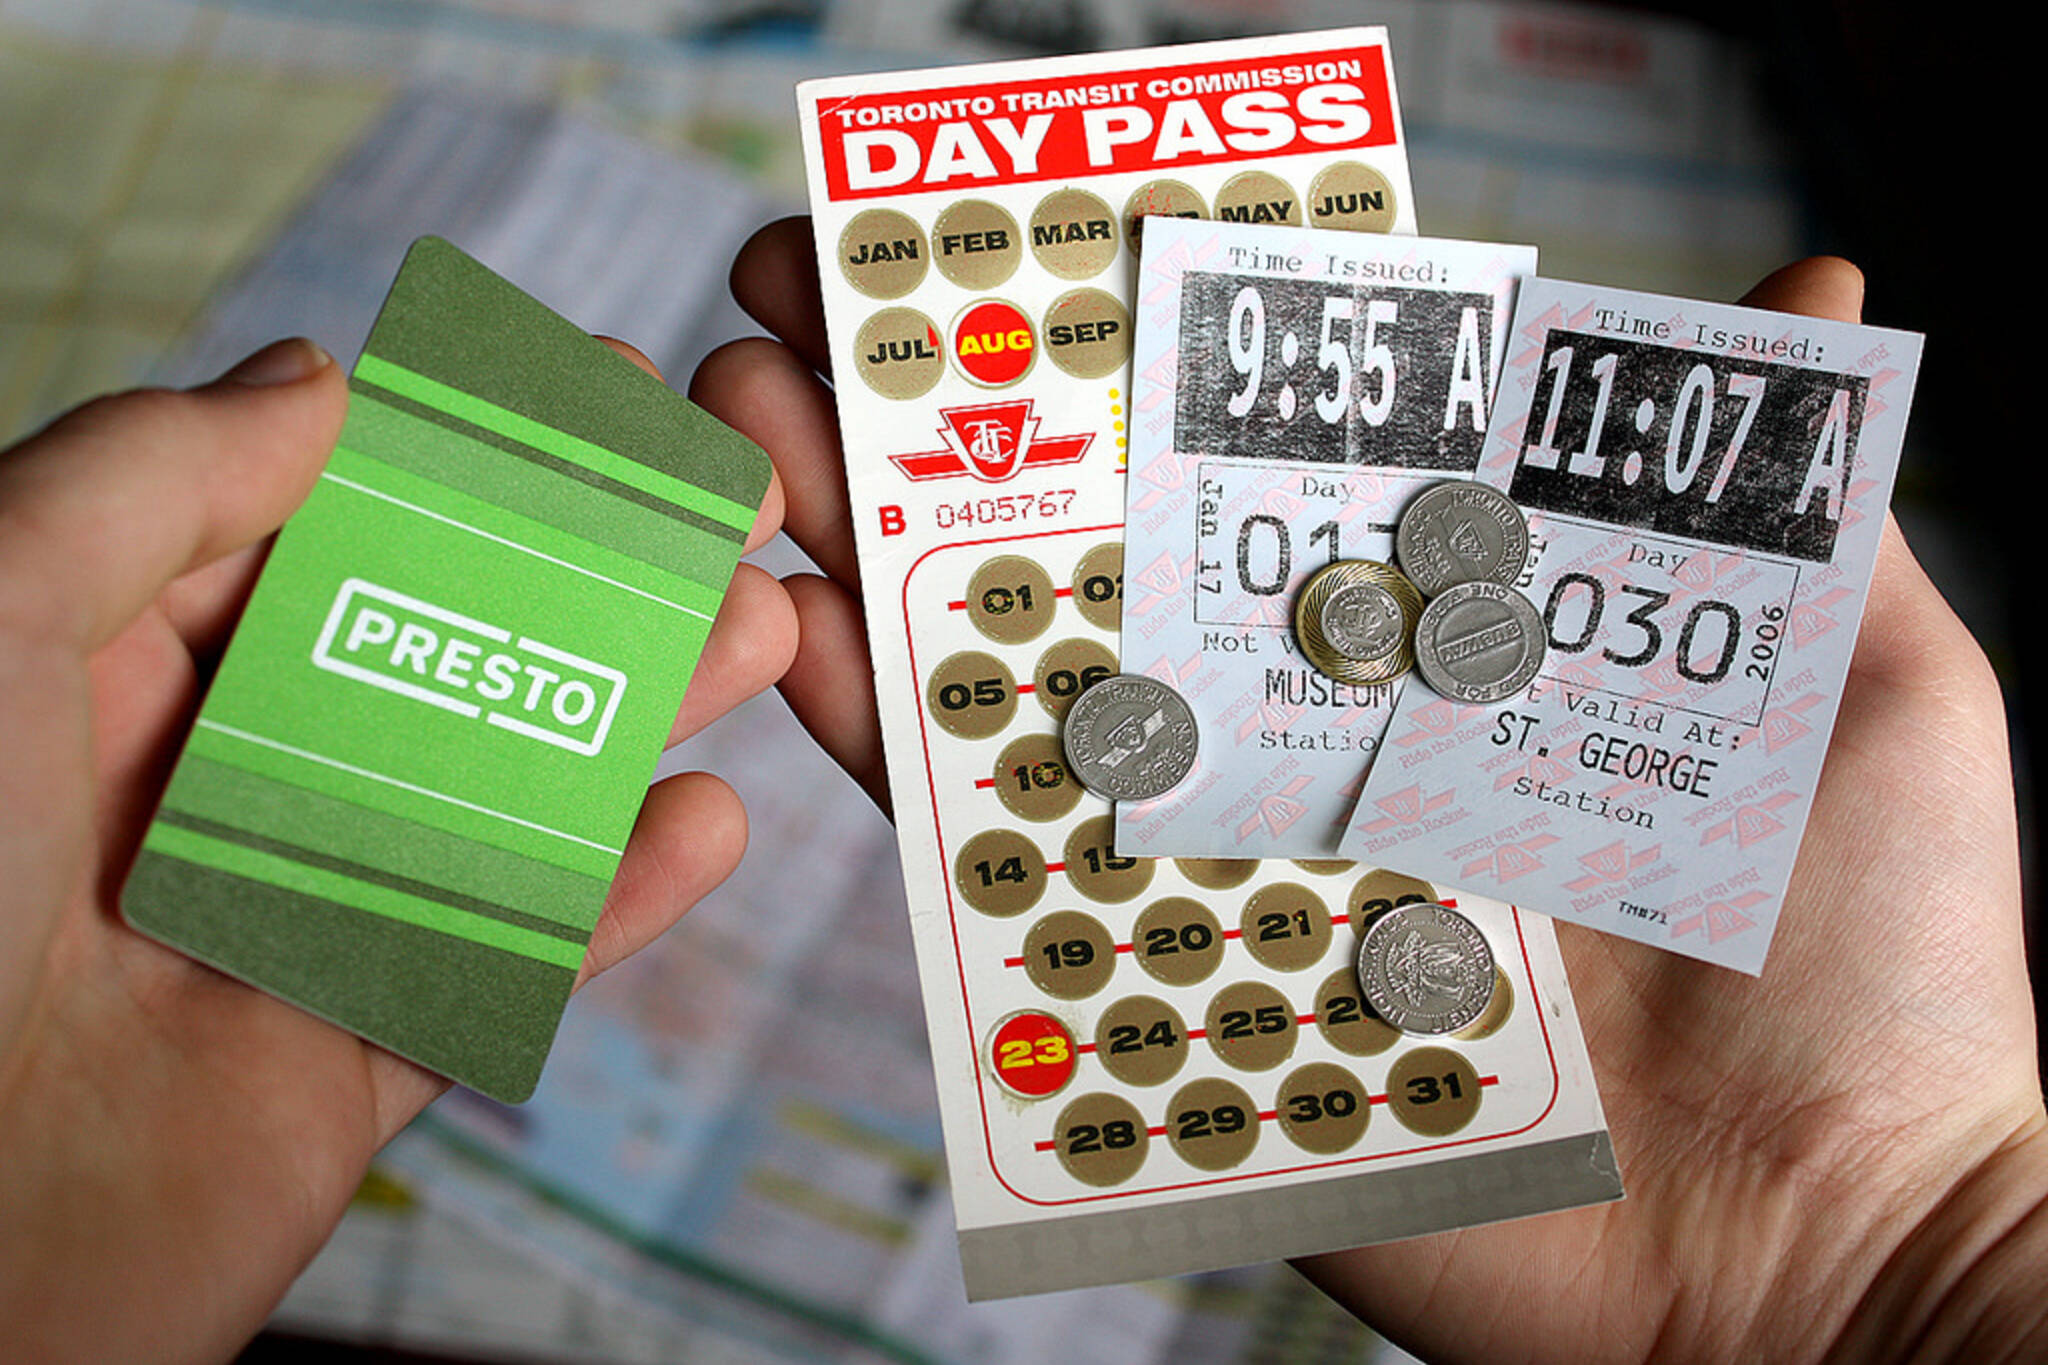 presto-cards-just-got-a-whole-lot-more-useful-for-ttc-riders